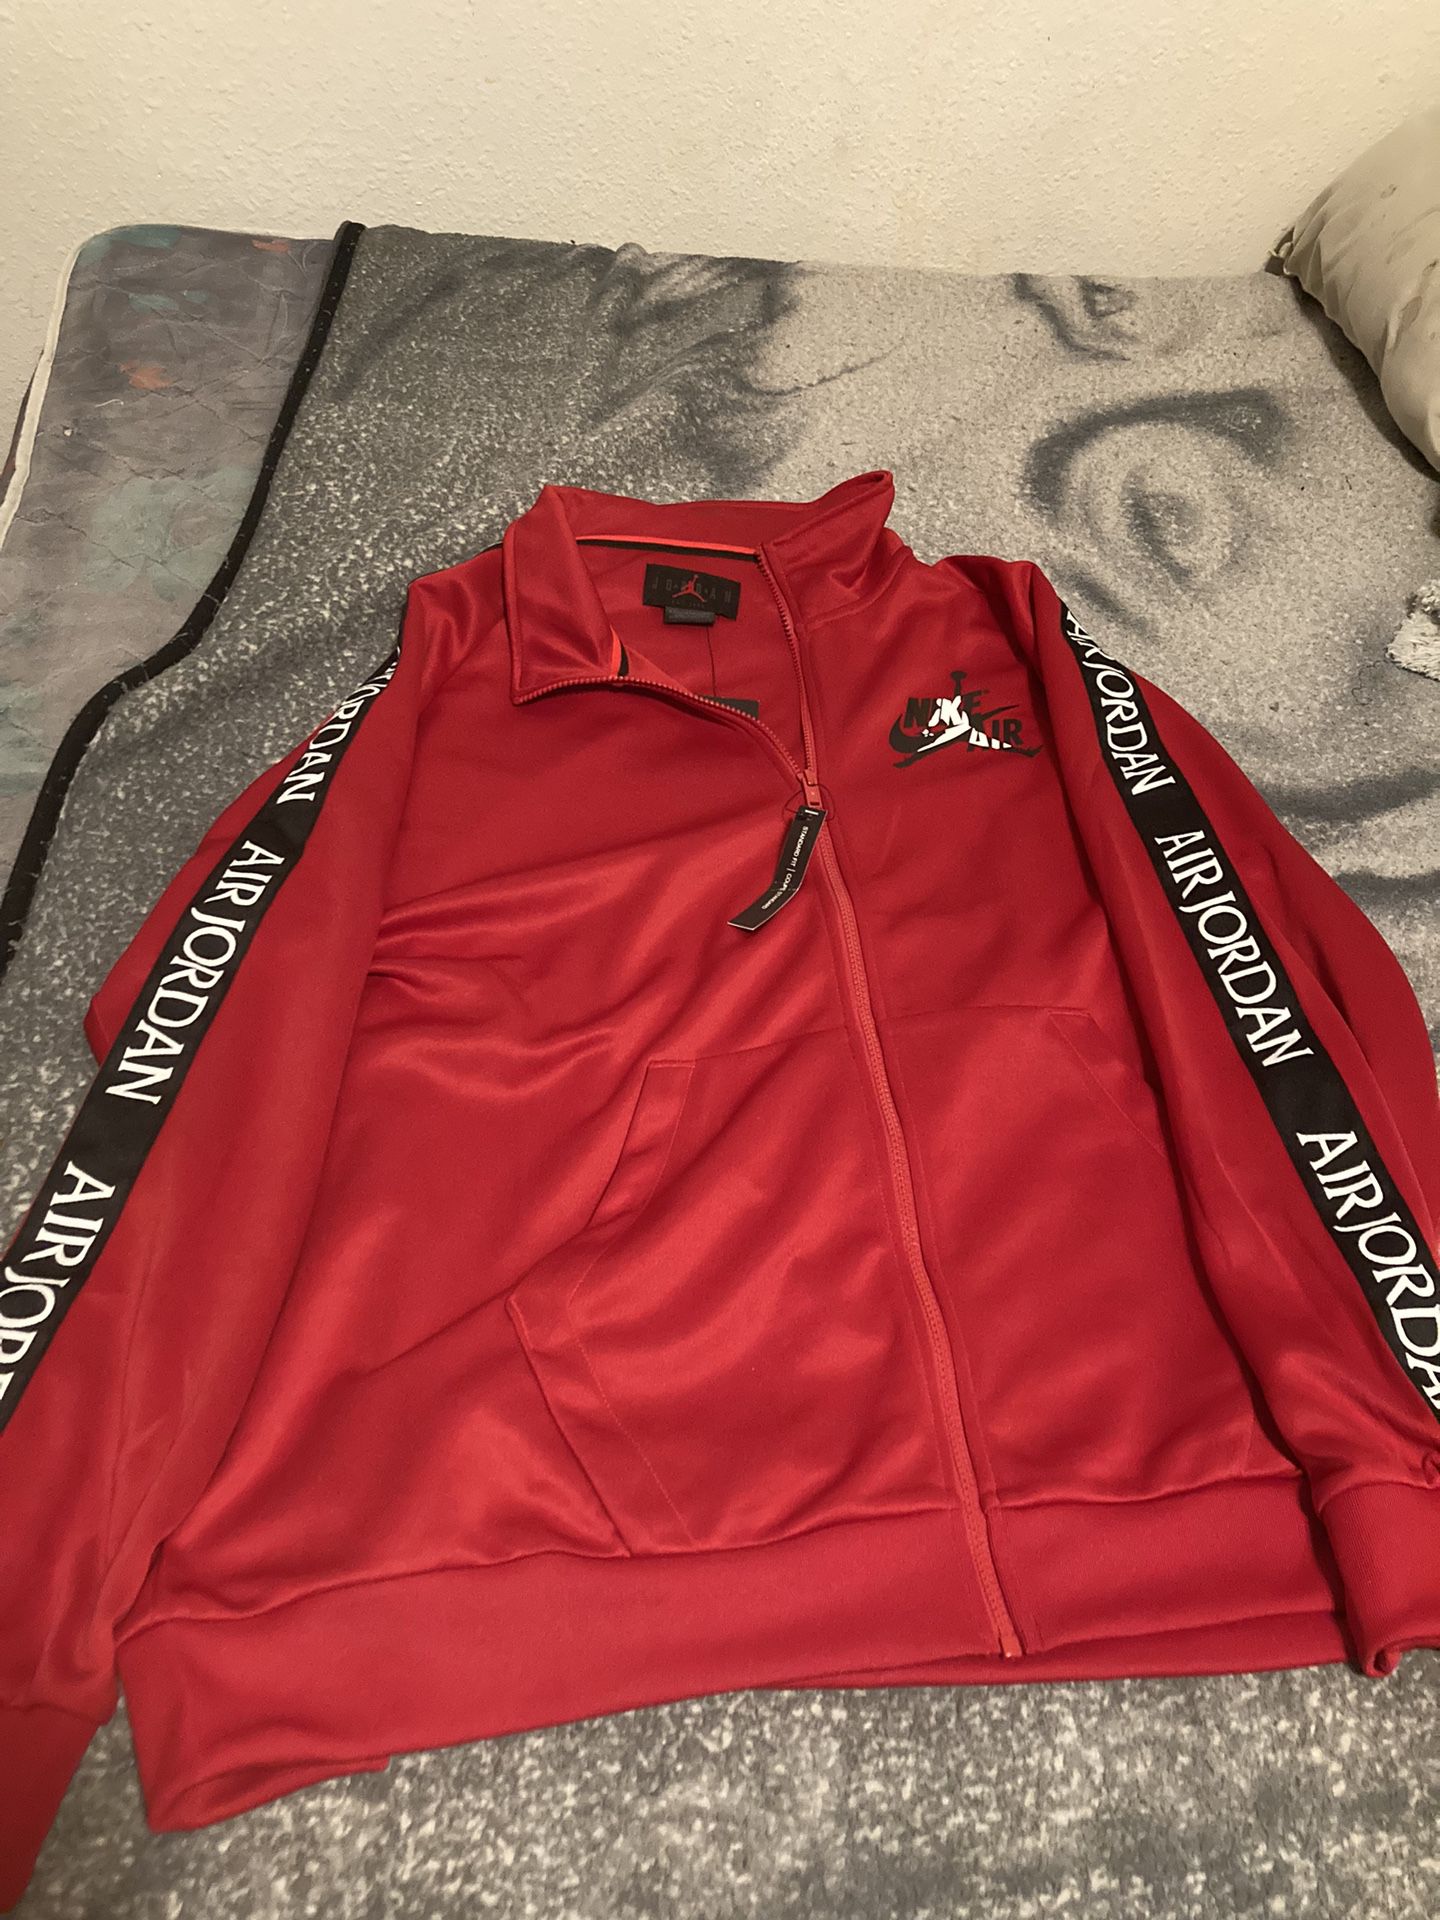 Jordan Jumpman Classics Men's Tricot Warm Up Jacket And Pants New With Tags in Escalon, CA - OfferUp